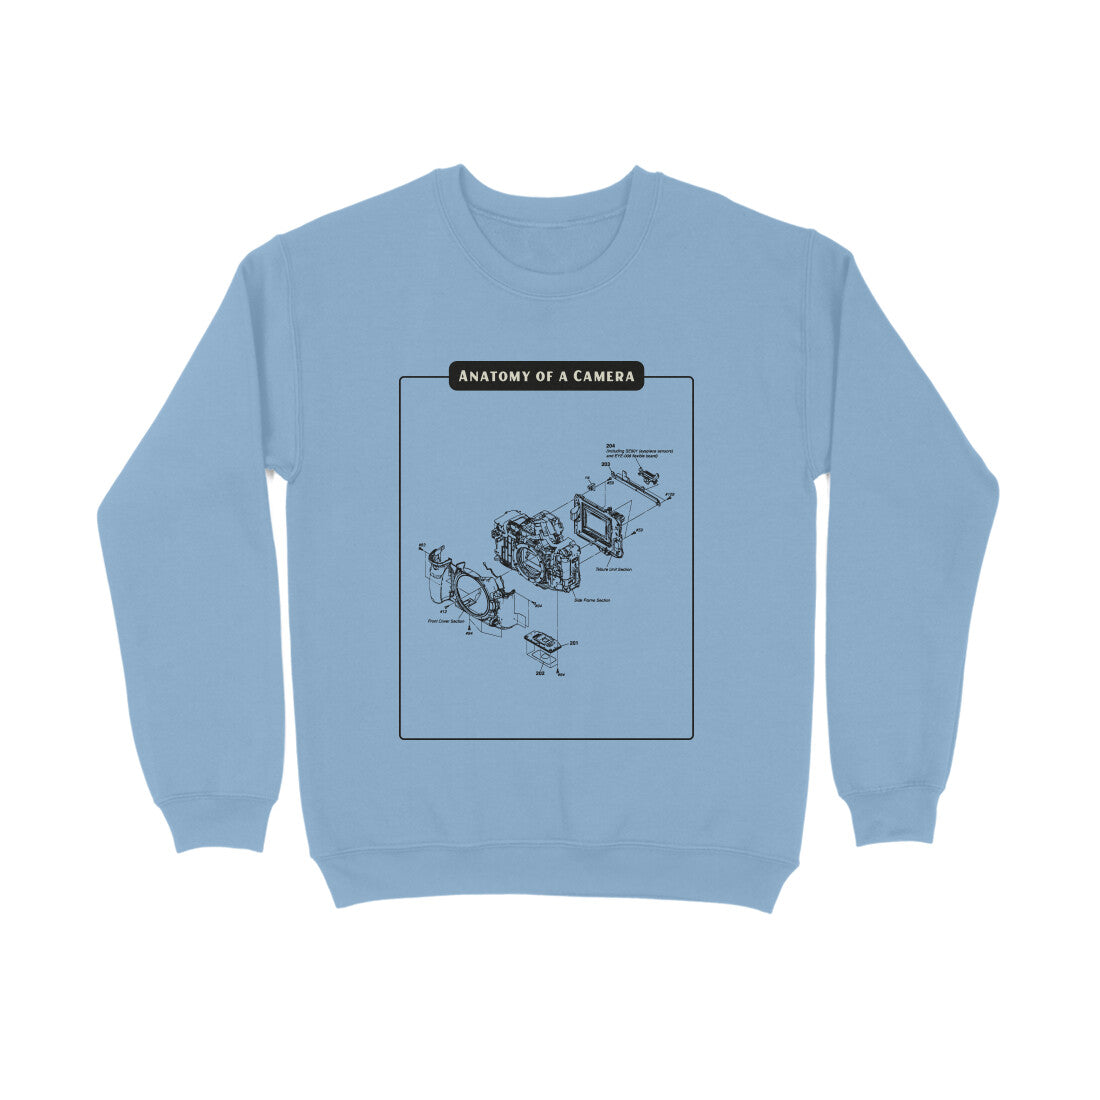 Anatomy of a Camera (Baby blue) - Men's Sweatshirt The Mean Indian Store